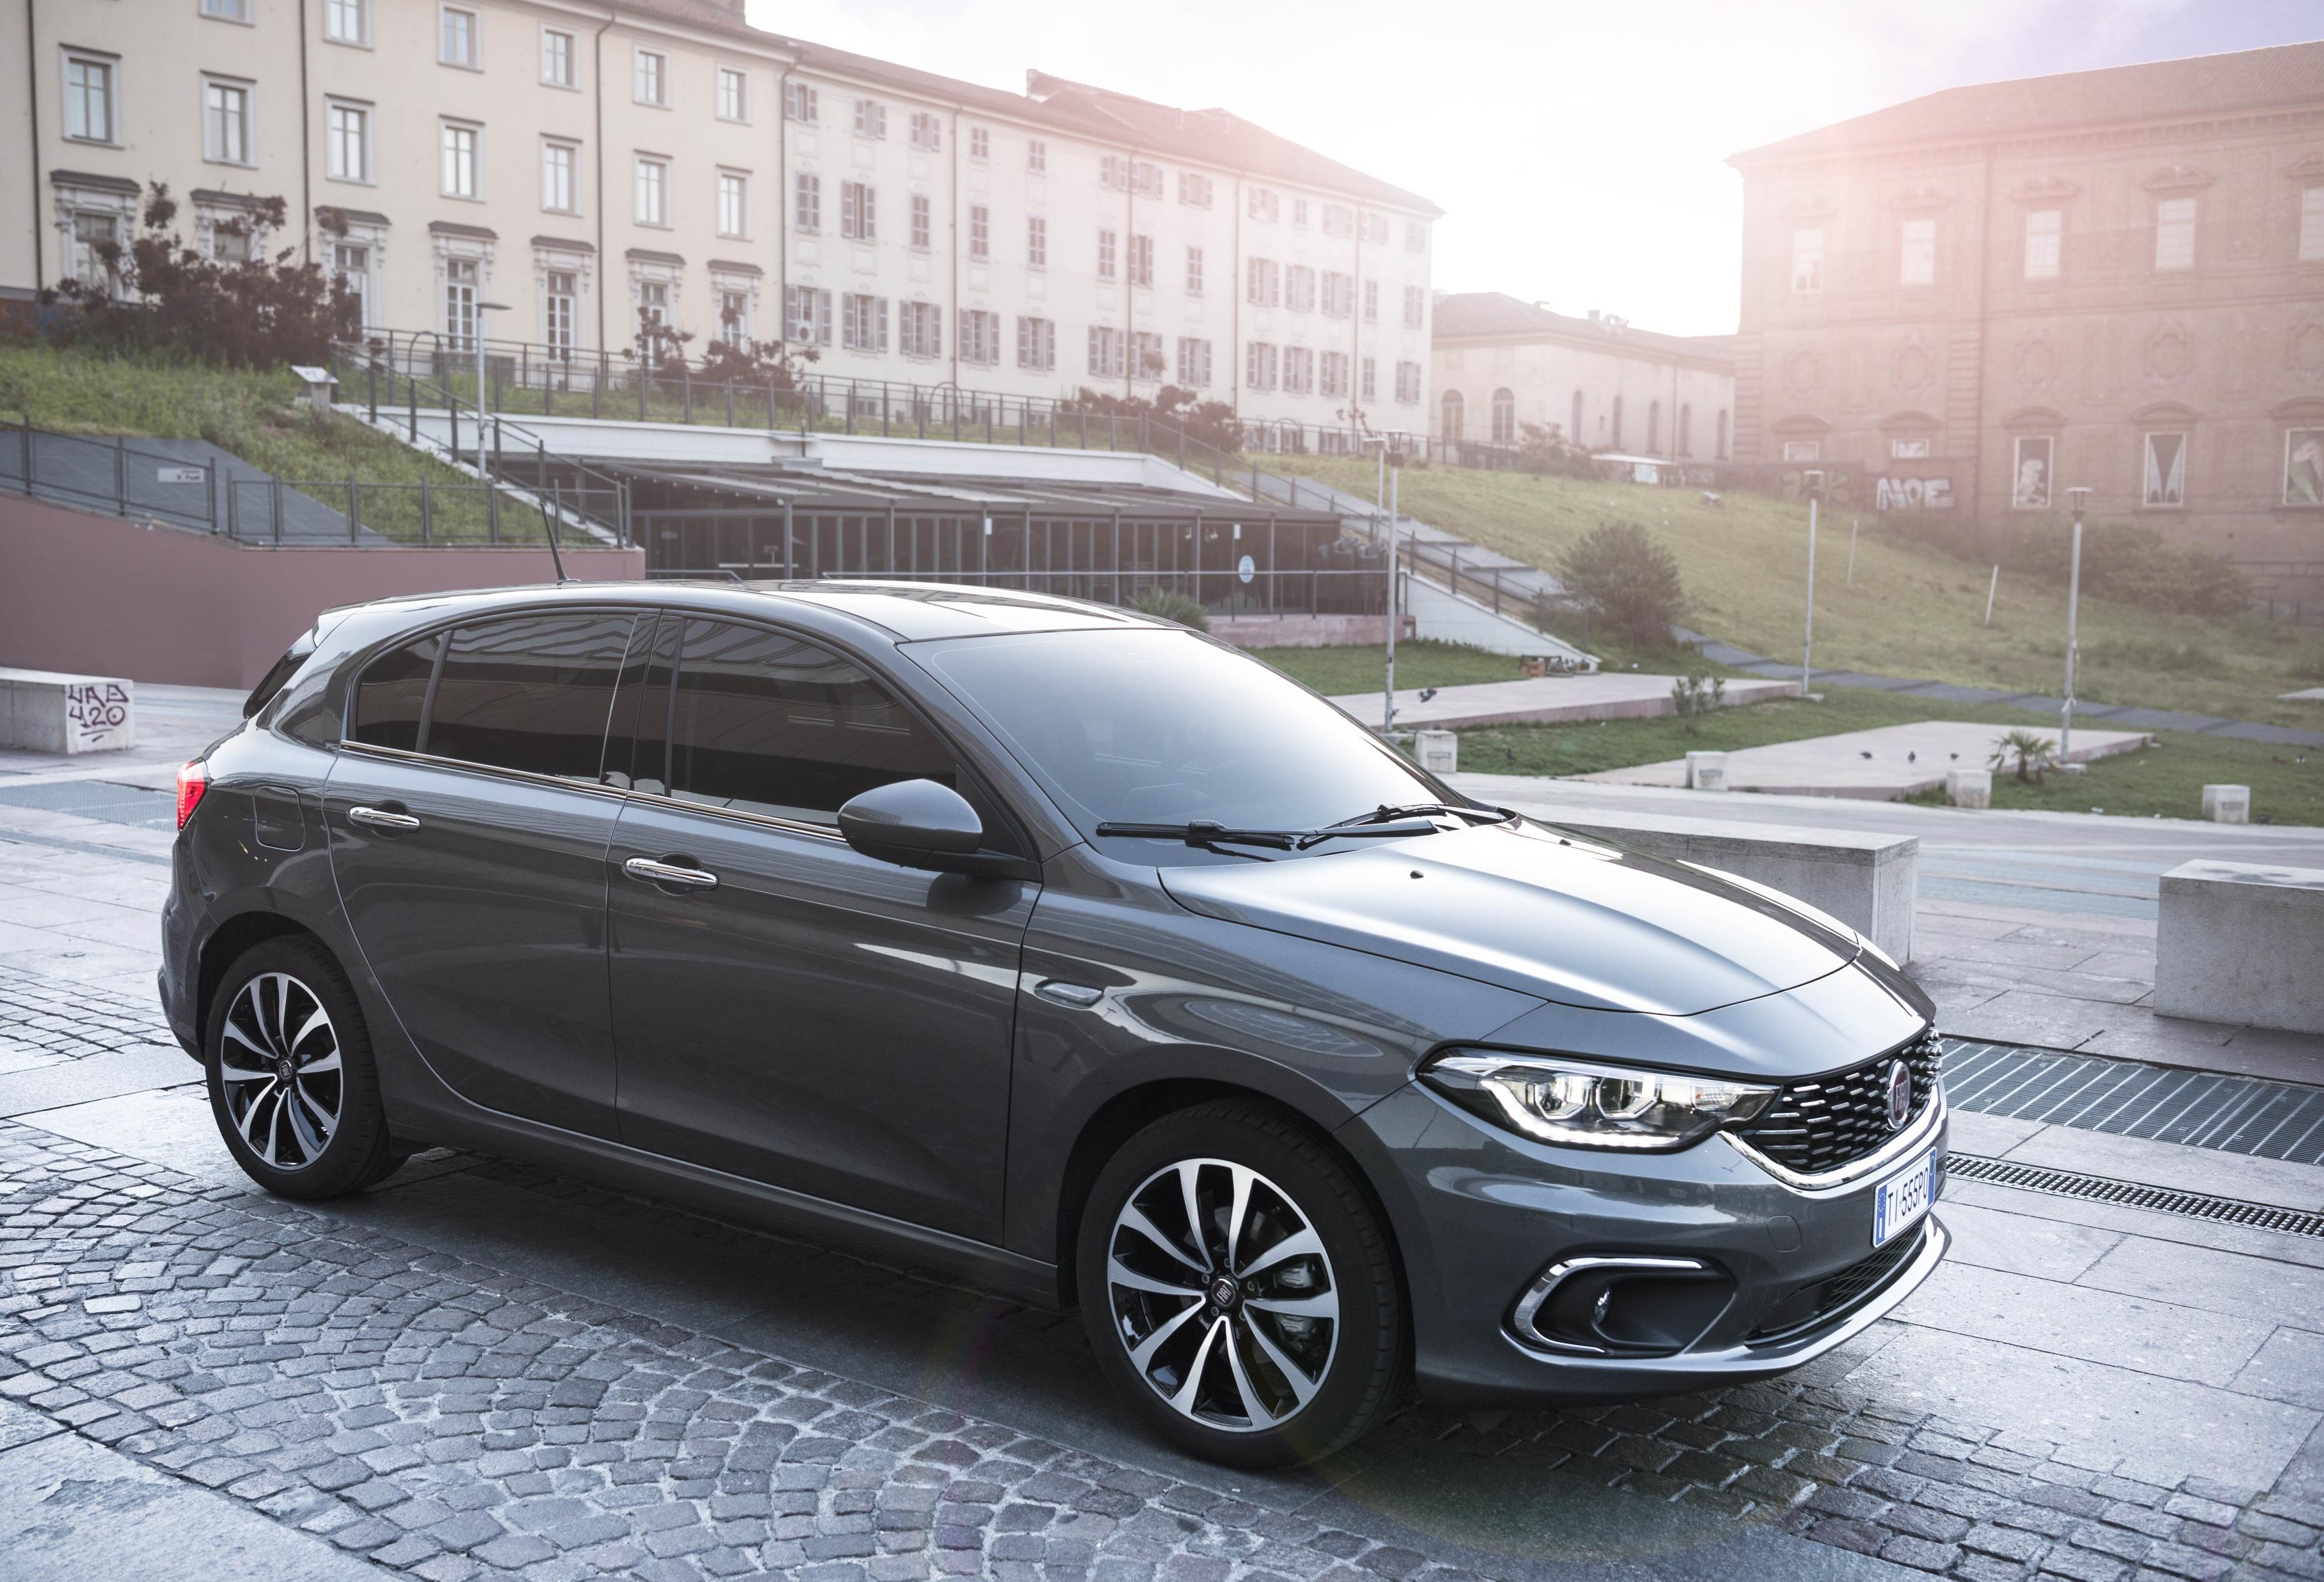 Fiat Tipo Hatchback best specifications